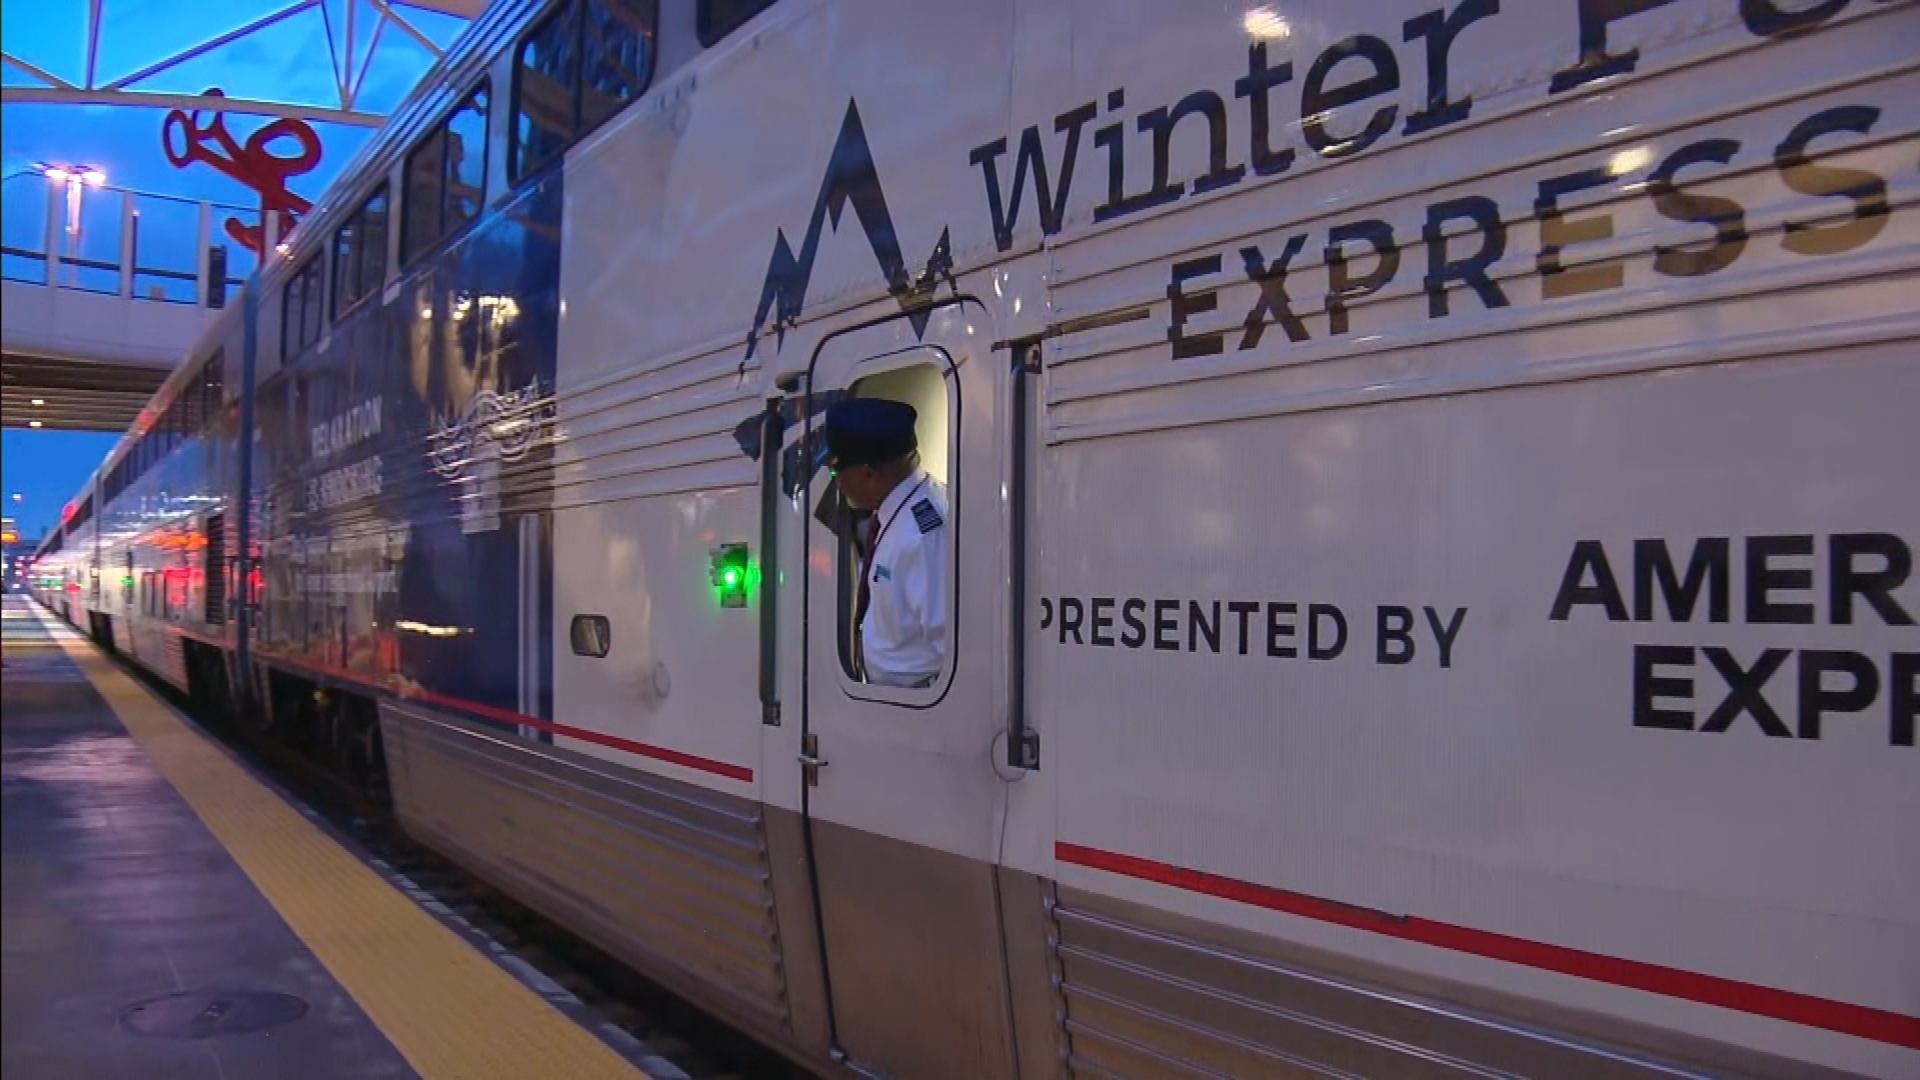 The Amtrak Winter Park Express ski train departs from Union Station